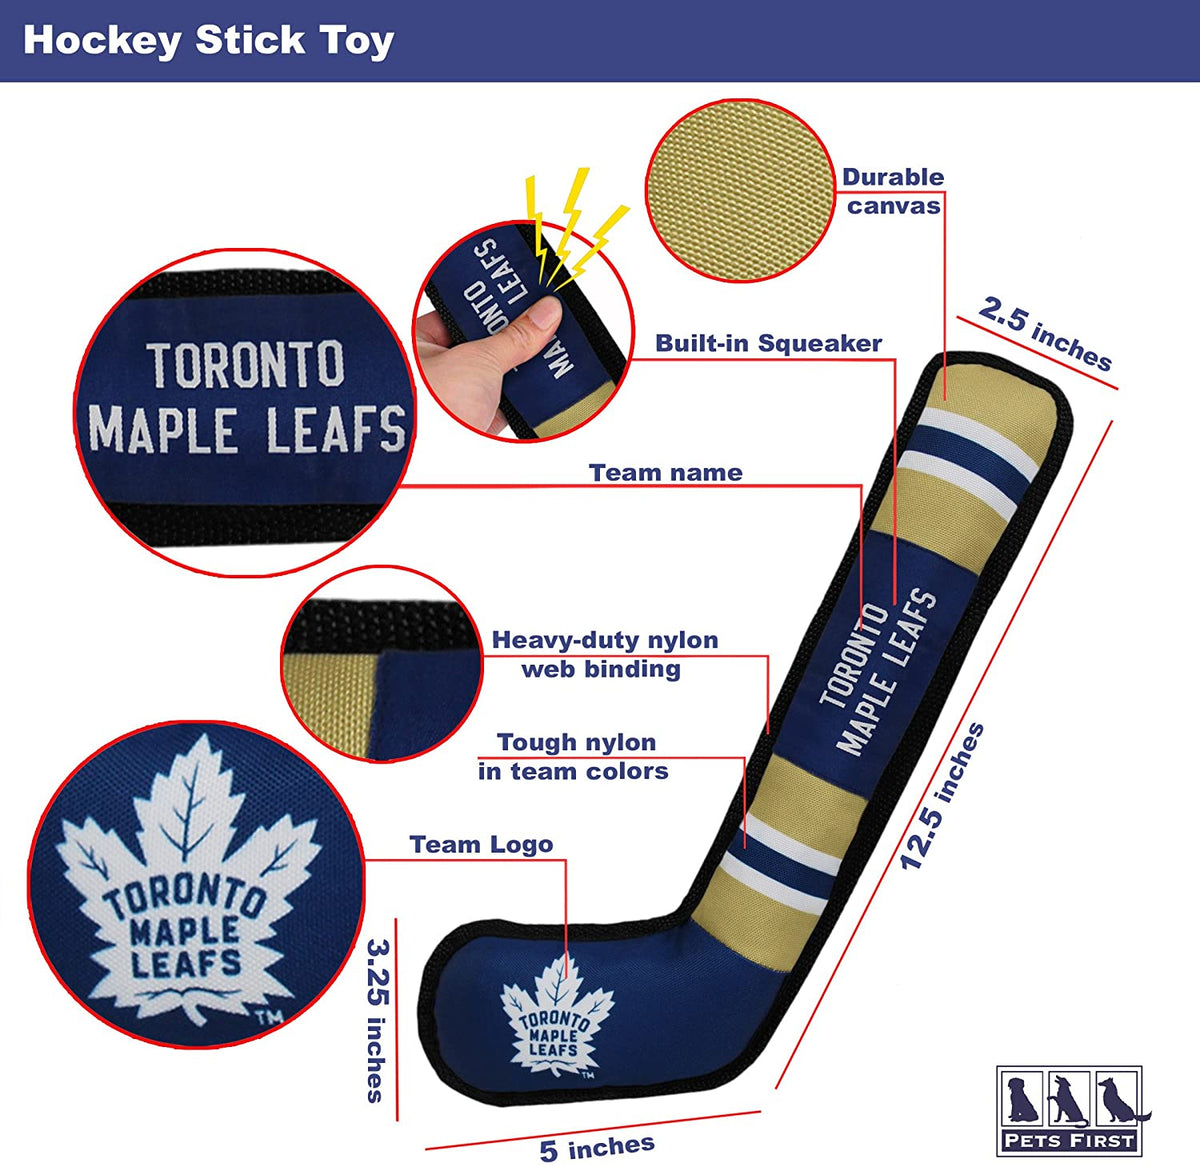 Pets First Toronto Maple Leafs Hockey Stick Toy for Dogs, X-Large